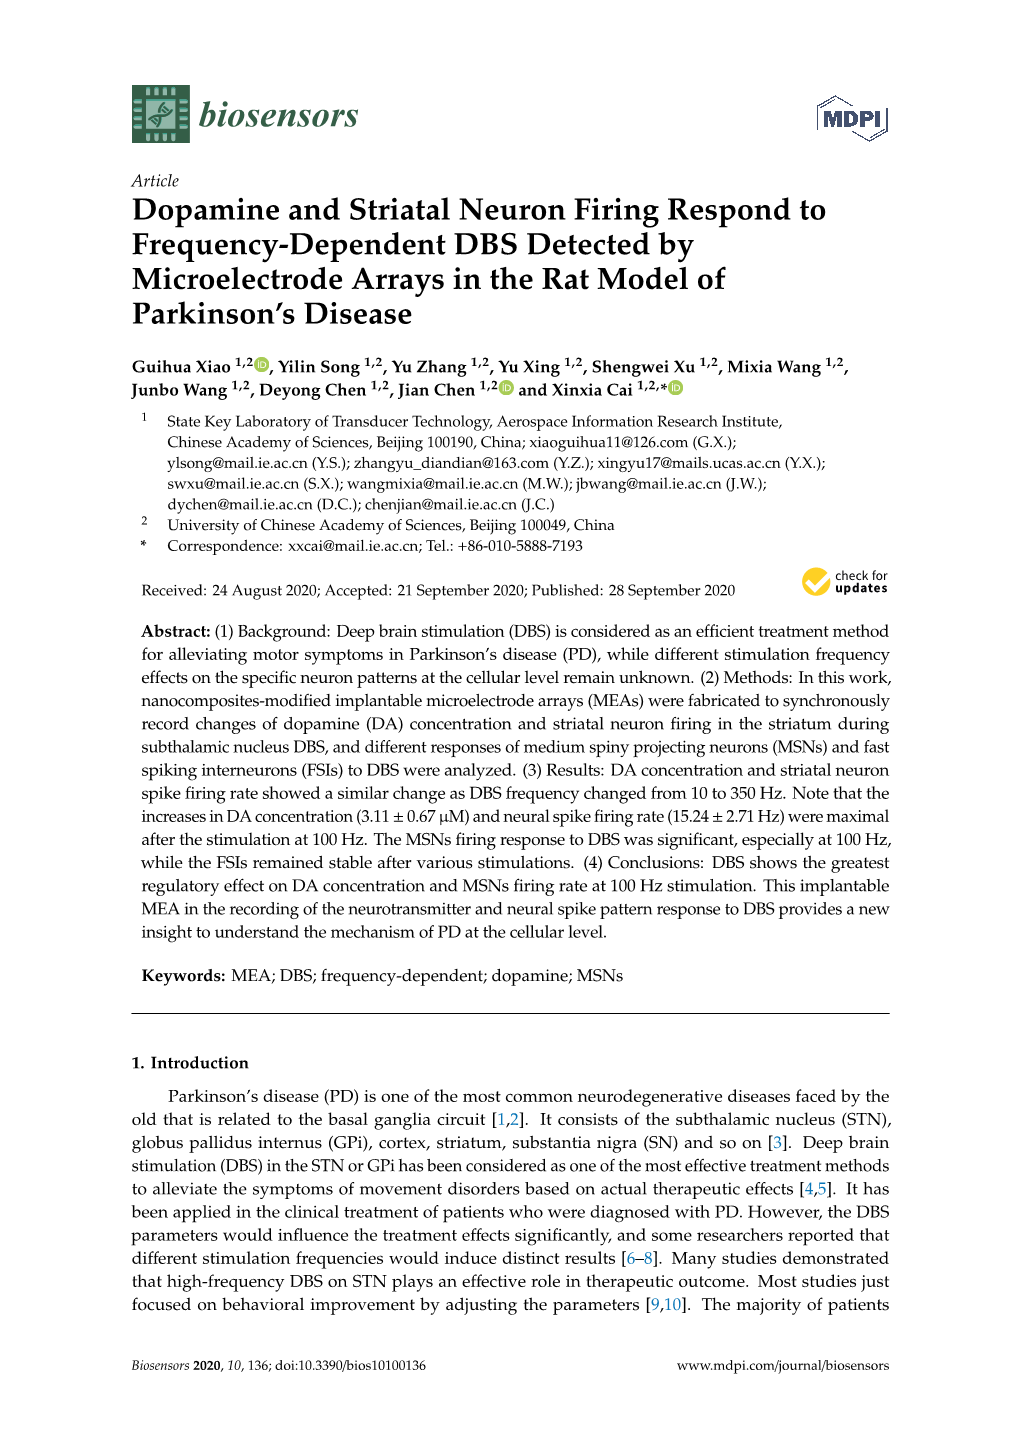 Dopamine and Striatal Neuron Firing Respond to Frequency-Dependent DBS Detected by Microelectrode Arrays in the Rat Model of Parkinson’S Disease